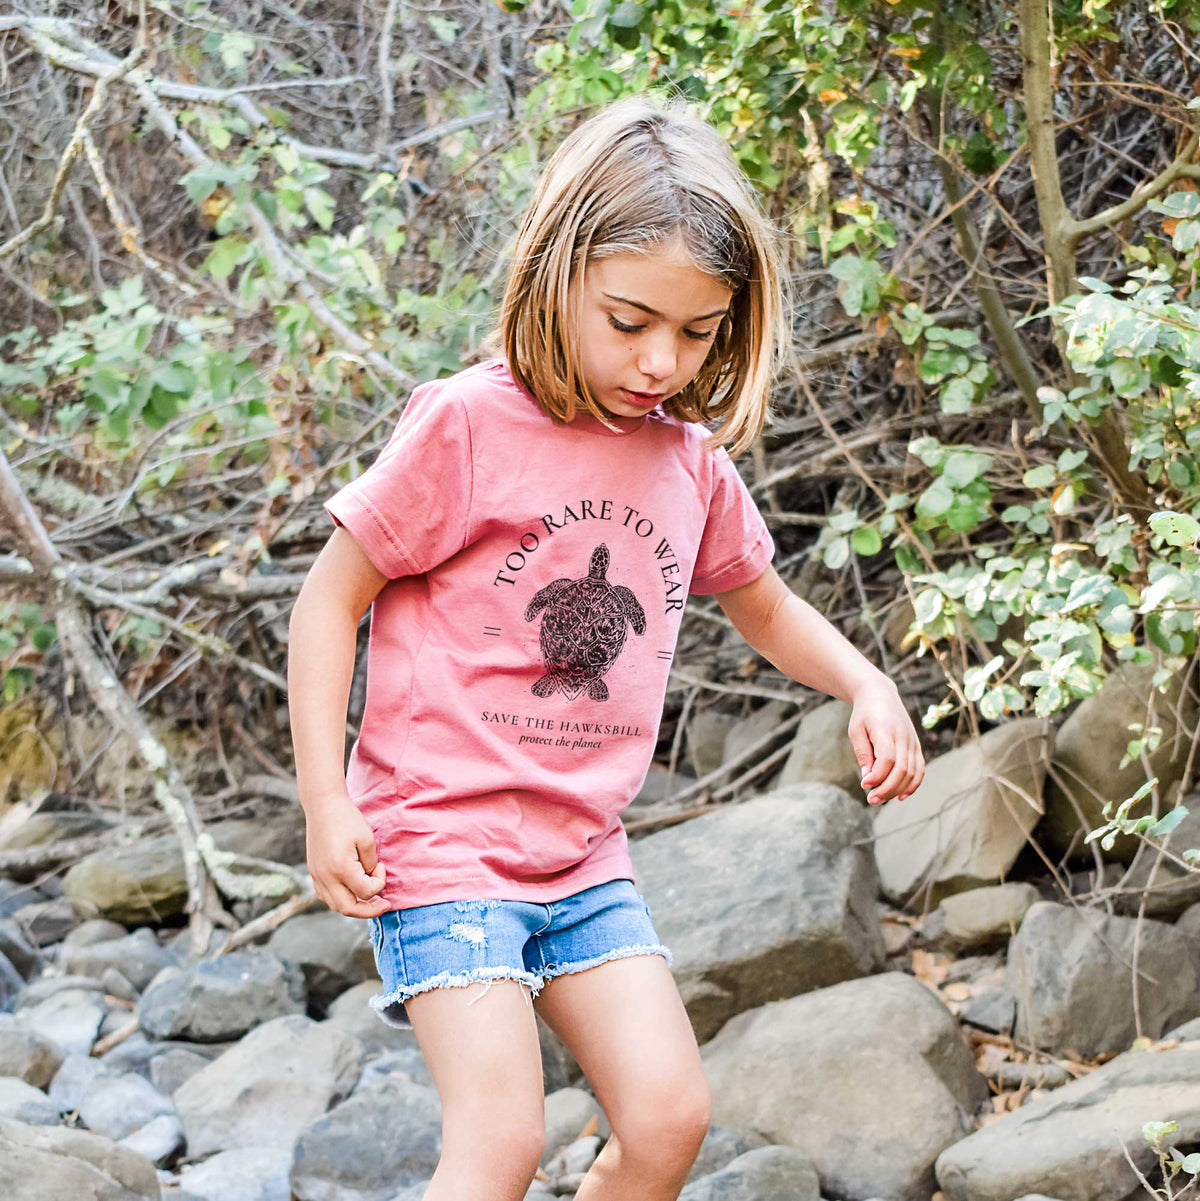 Too Rare to Wear - Save the Hawksbill - Kids Shirt